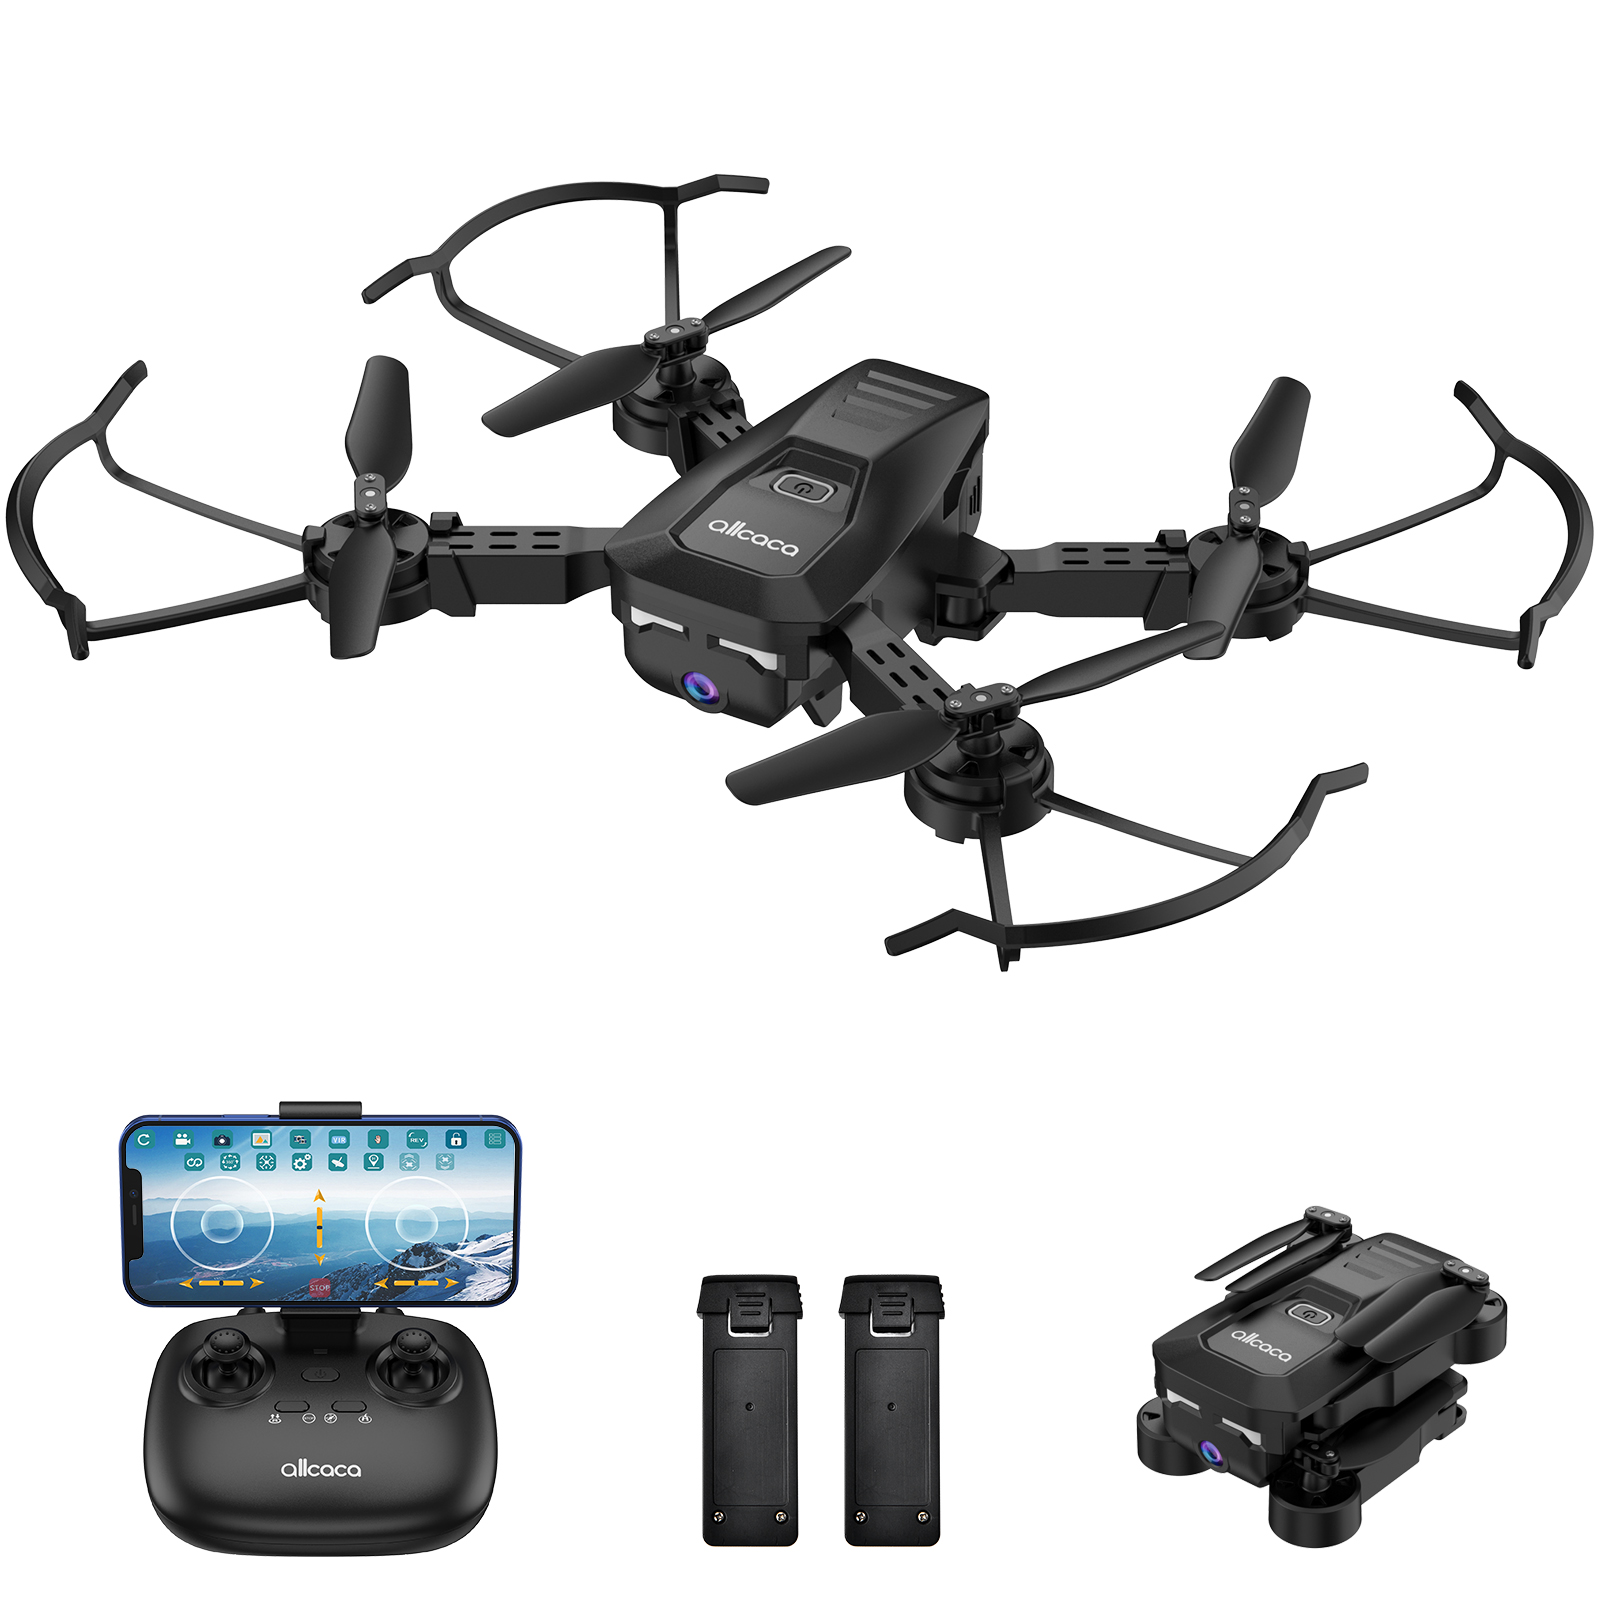 RC Quadcopter Remote Control Drone - ALLCACA RC Drone 6-axis Gyro Quadcopter Optical Flow Positioning Drone with Double 720P HD Cameras, Altitude Hold, Headless Mode and 360° Flip, Black - image 1 of 9